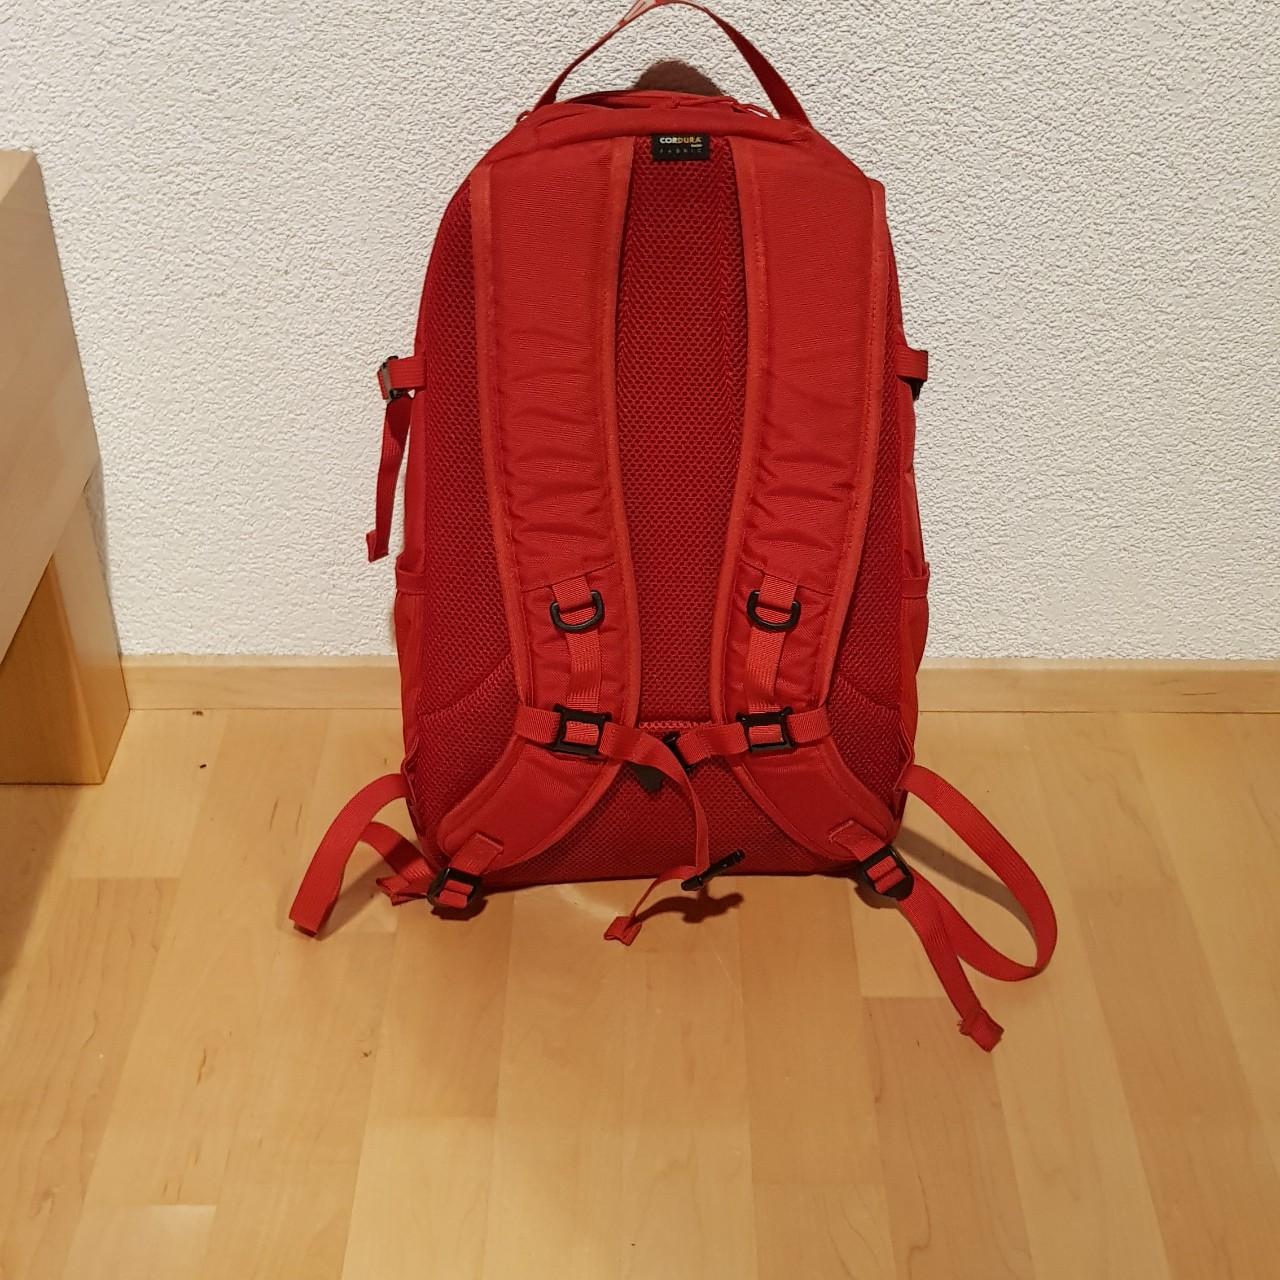 W2C) Supreme backpack ss18 : r/DHgate